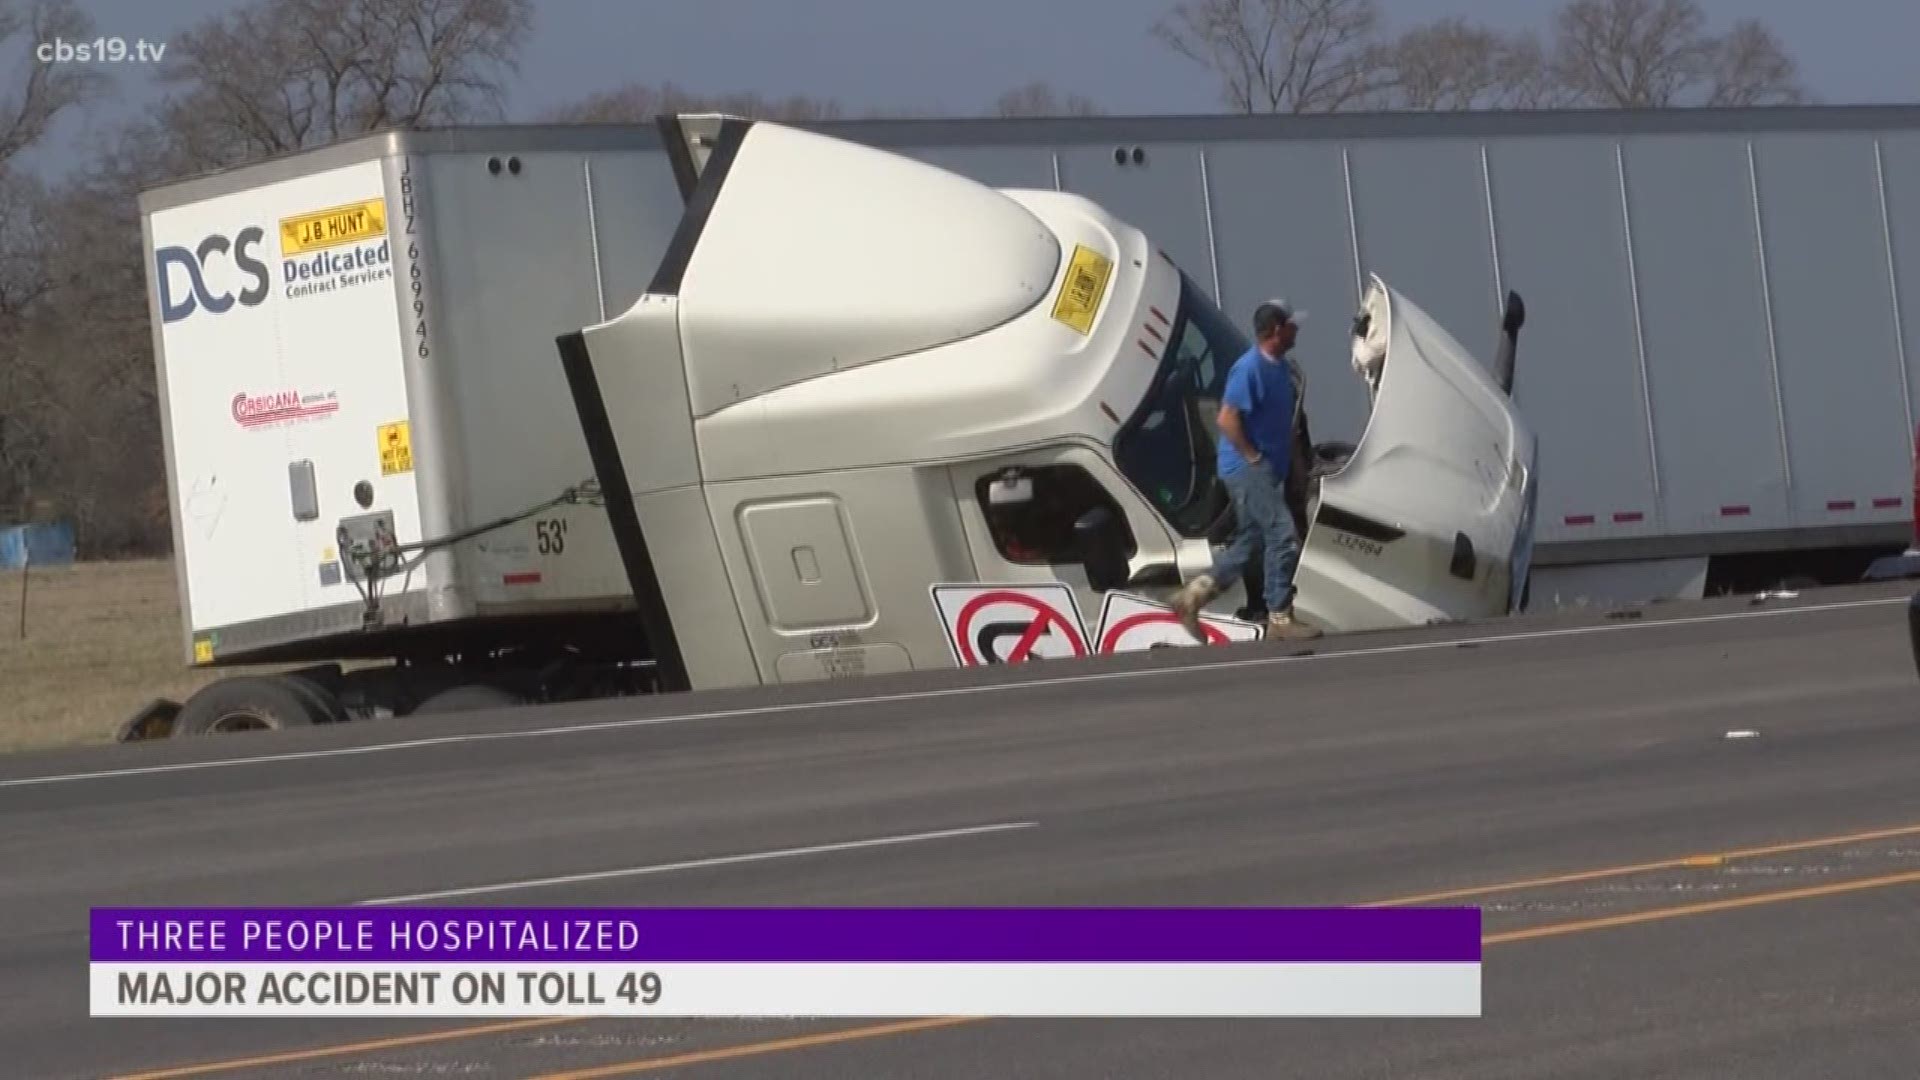 CBS 19's Darcy Birden is live where an accident occurred earlier Monday afternoon. It involved 3 vehicles and closed the toll road for close to four hours.